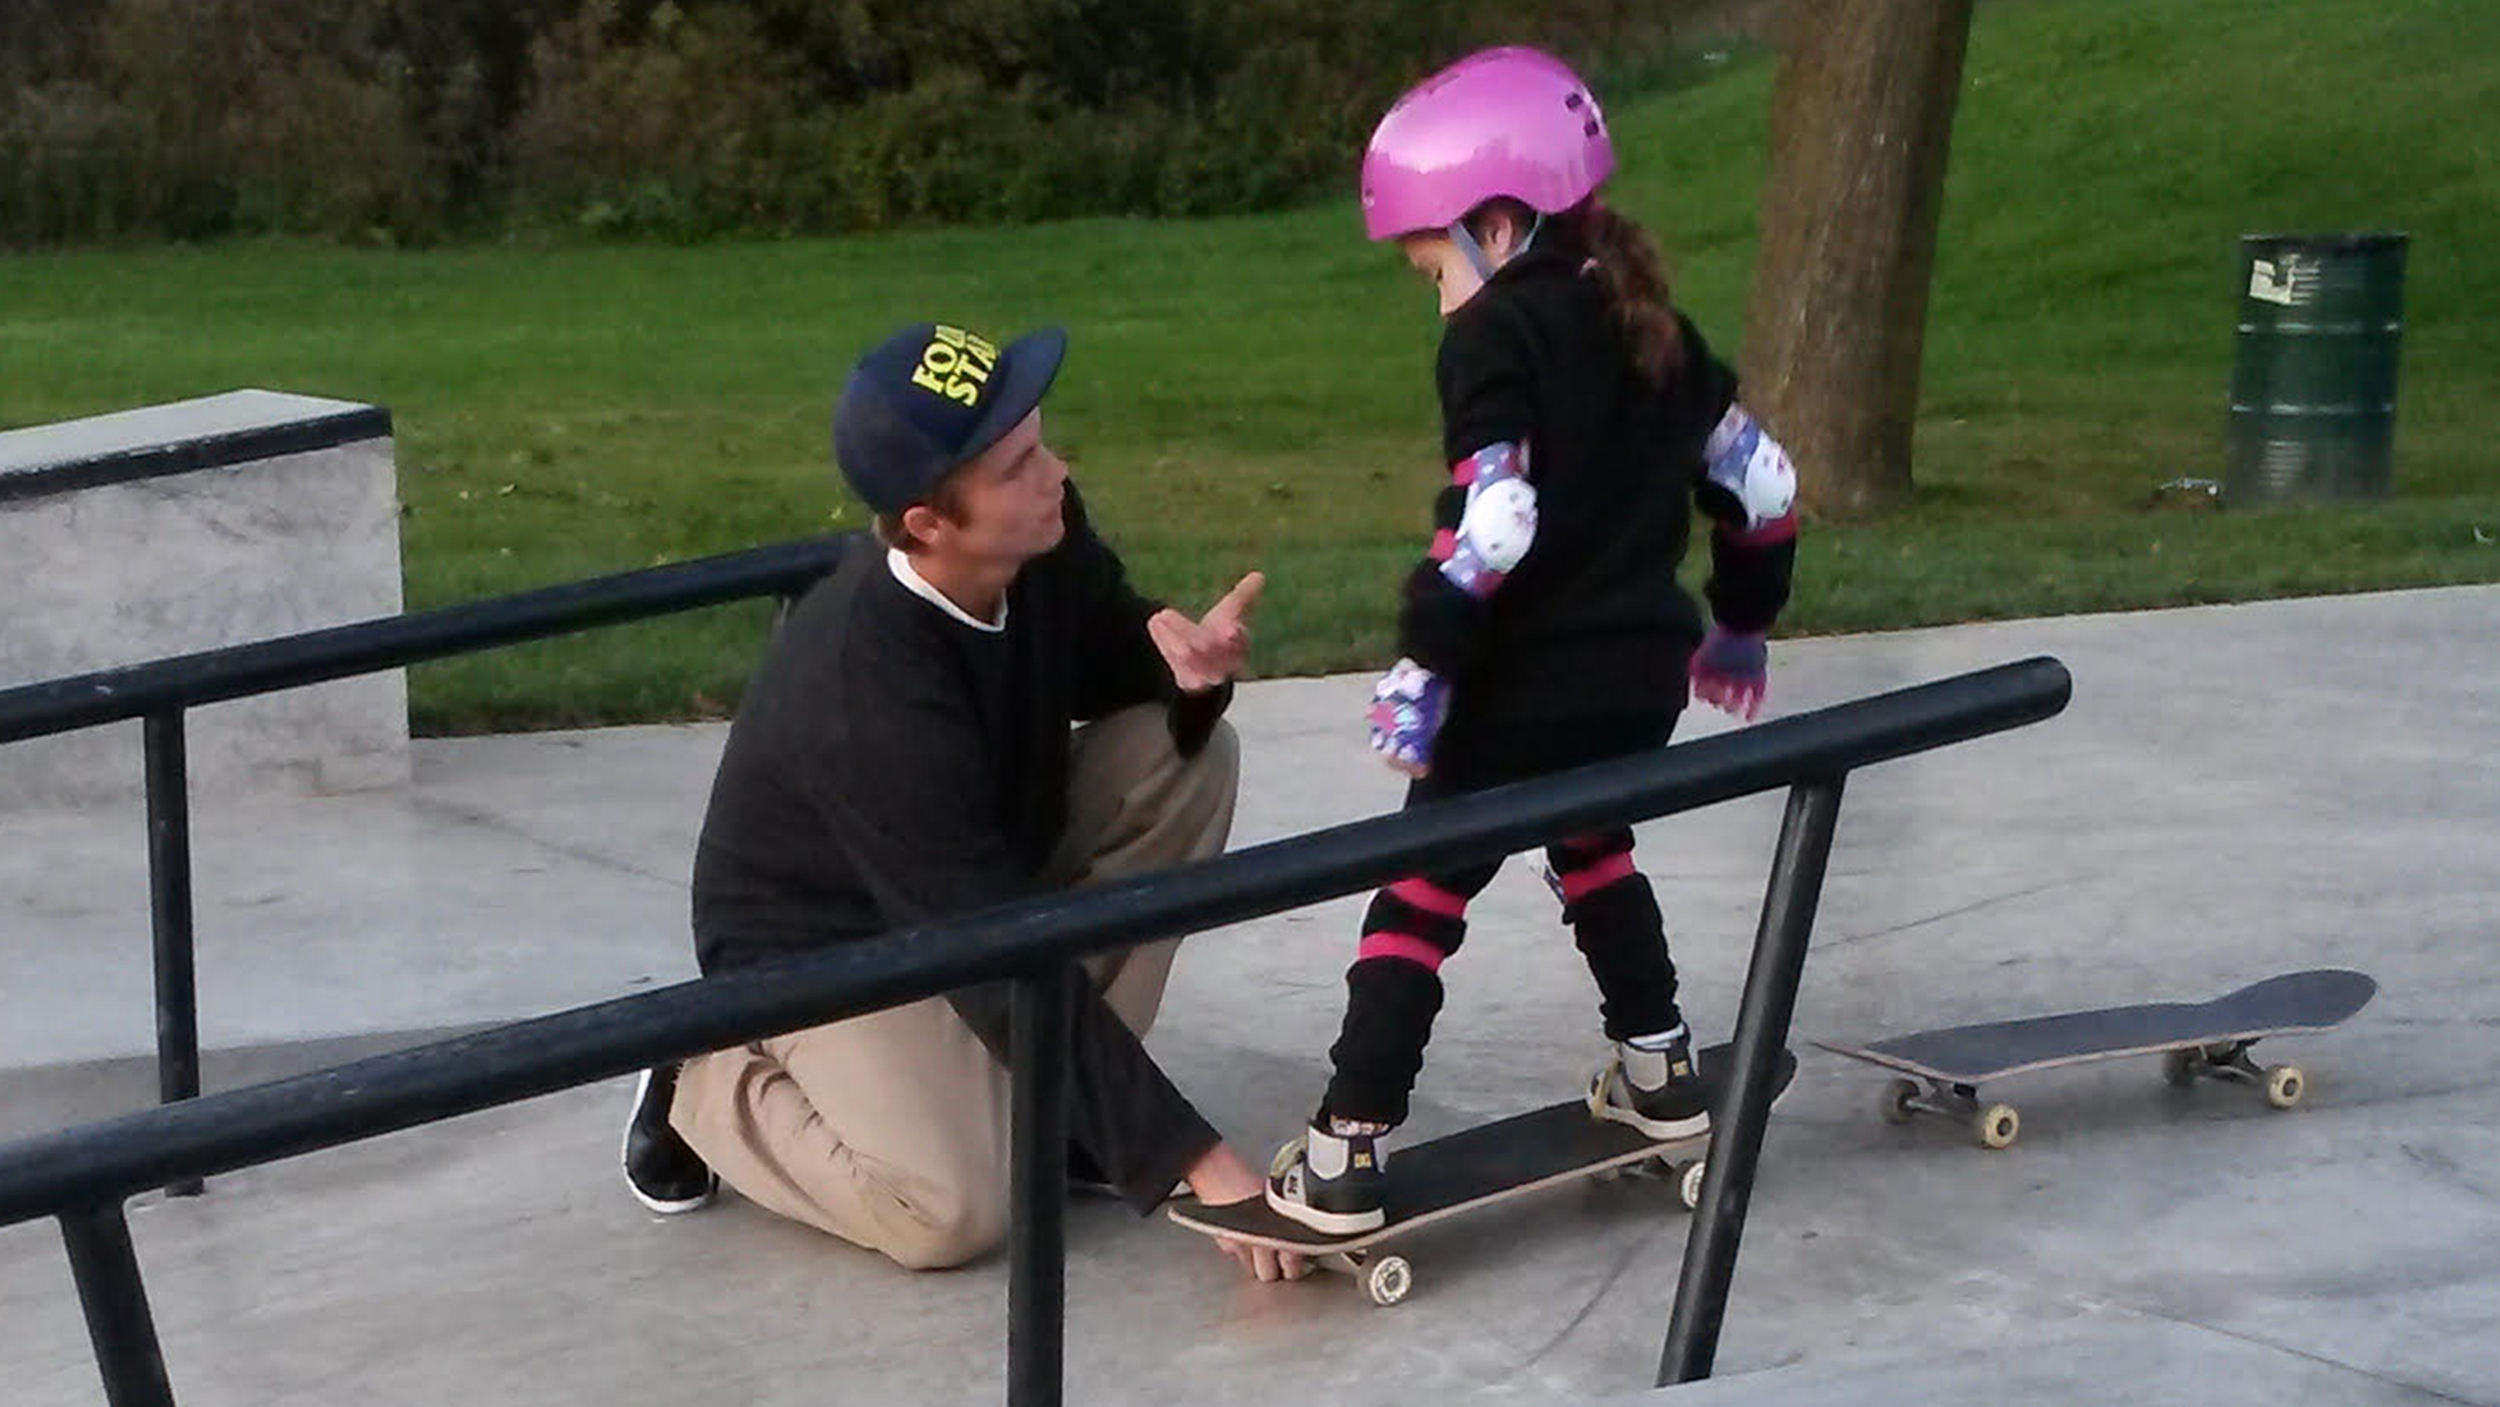 To the teen boy at the skate park': Mom's letter goes viral - TODAY.com